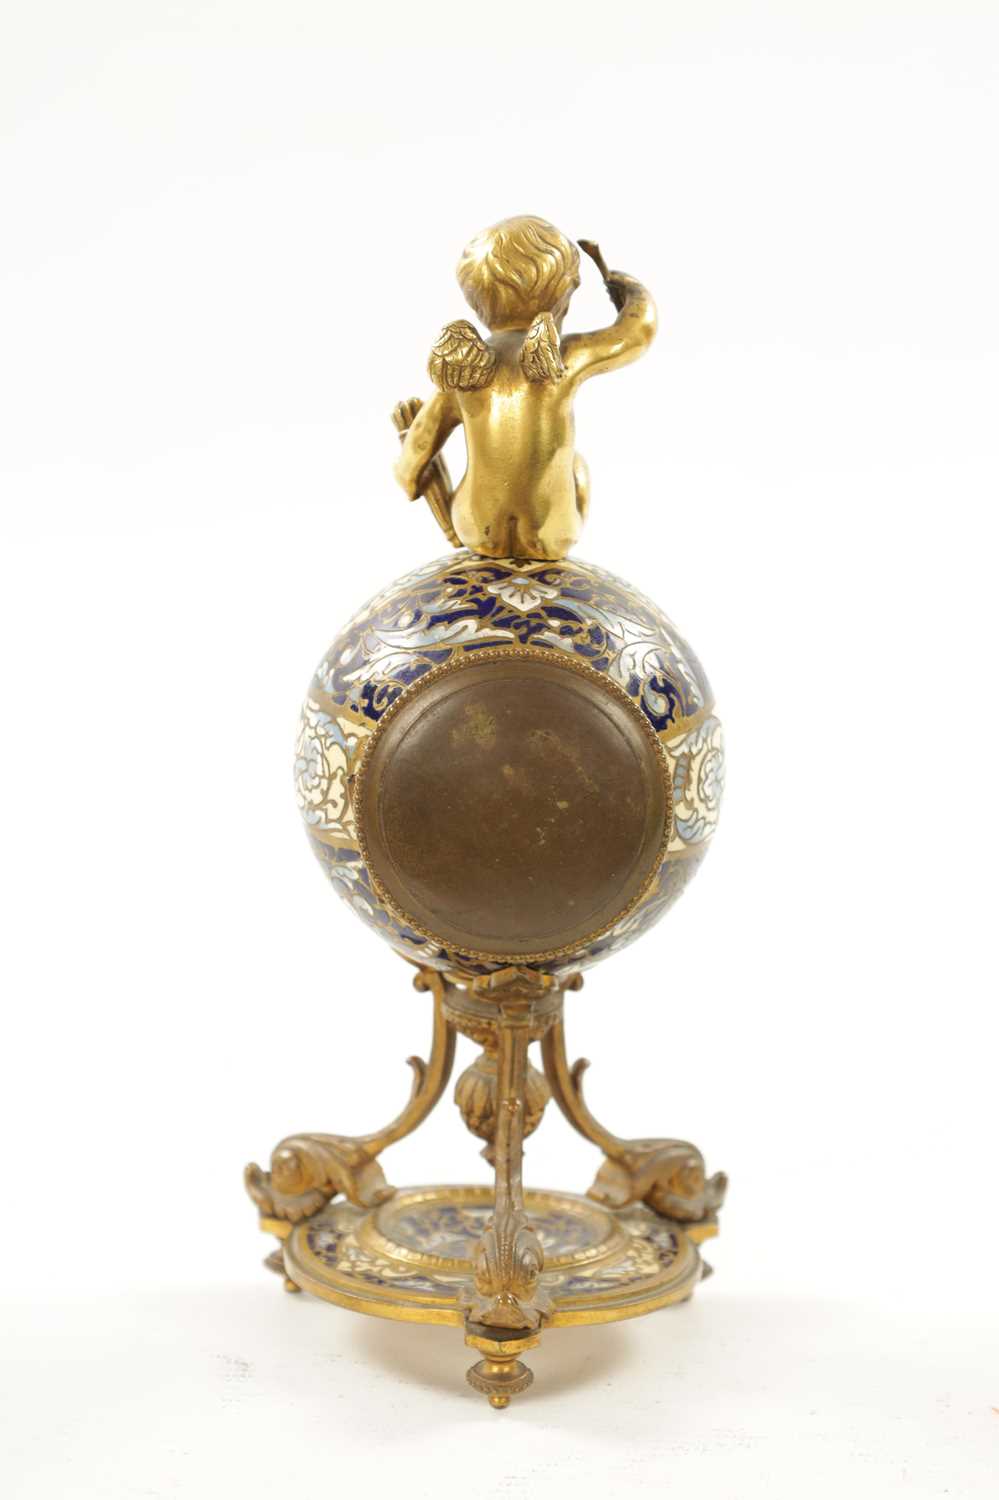 A LATE 19TH CENTURY FRENCH ORMOLU CHAMPLEVE ENAMEL MANTEL CLOCK - Image 6 of 8